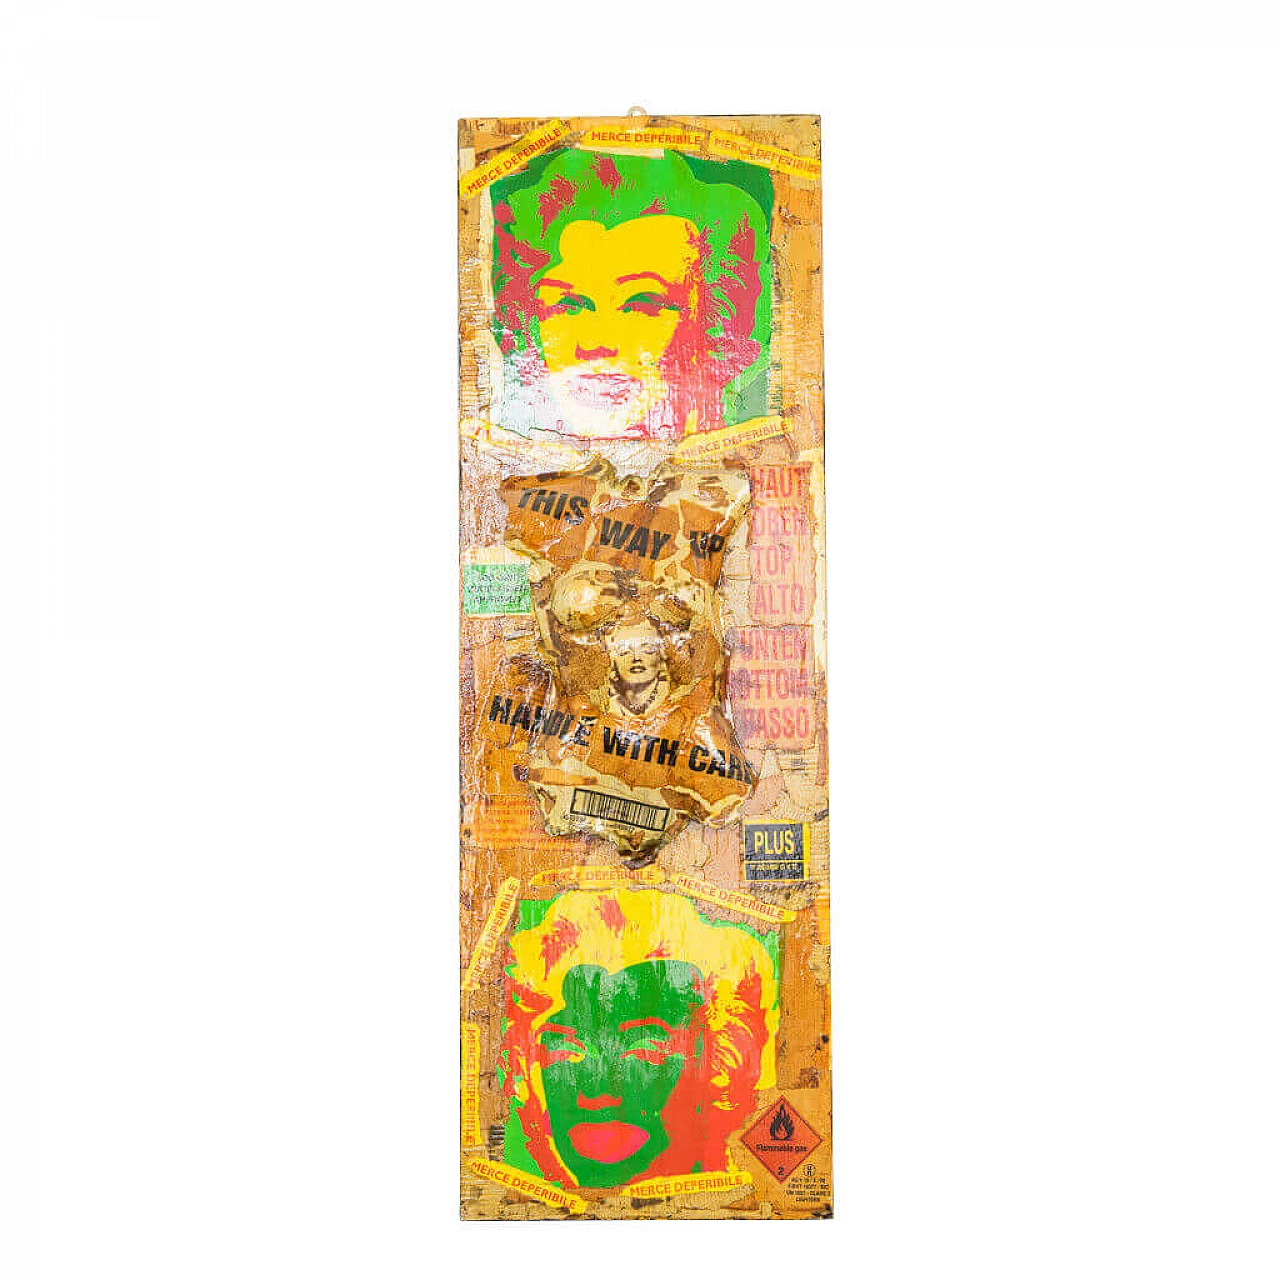 Mixed media painting on wood in pop-art style by Giuseppe De Simone, 2009 1199200